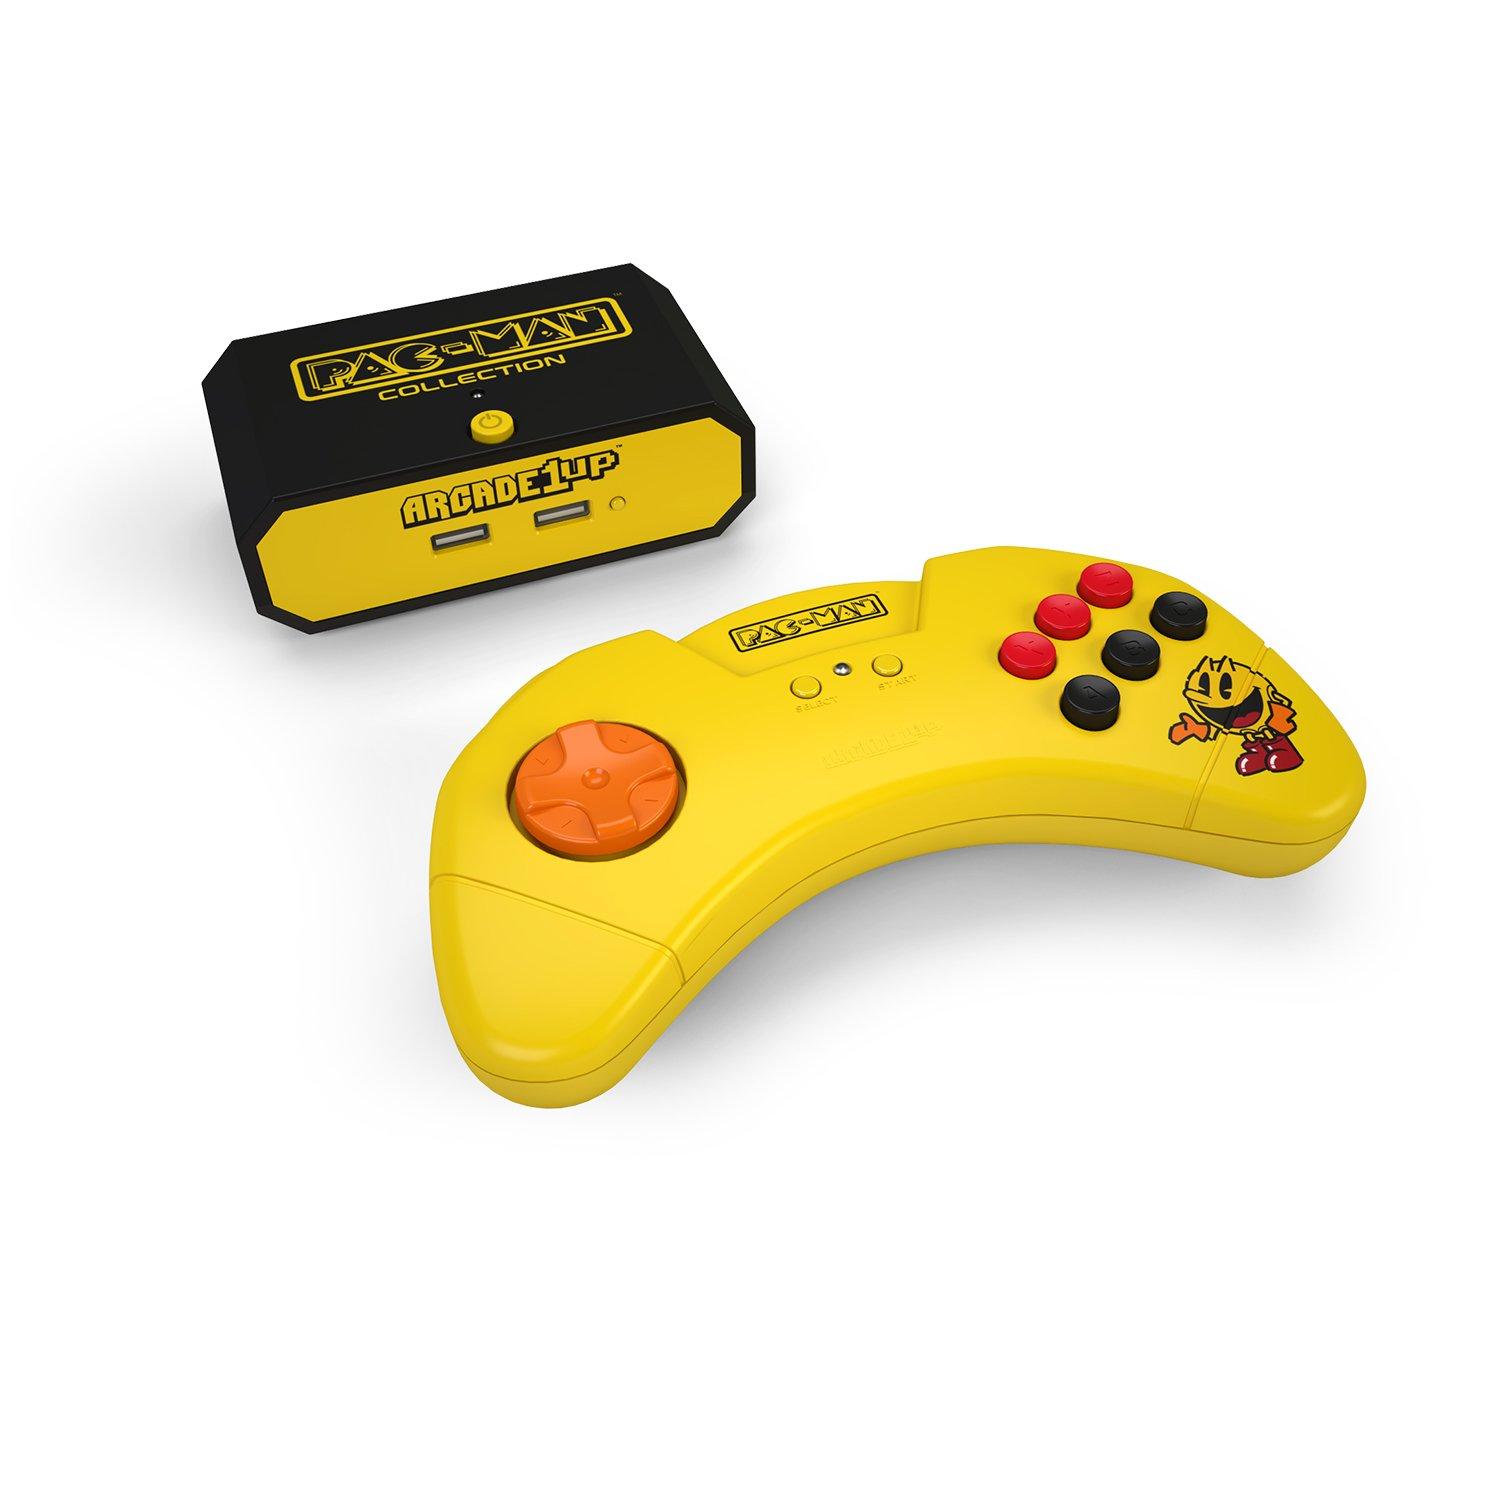 PAC-MAN Collection HDMI Game Console